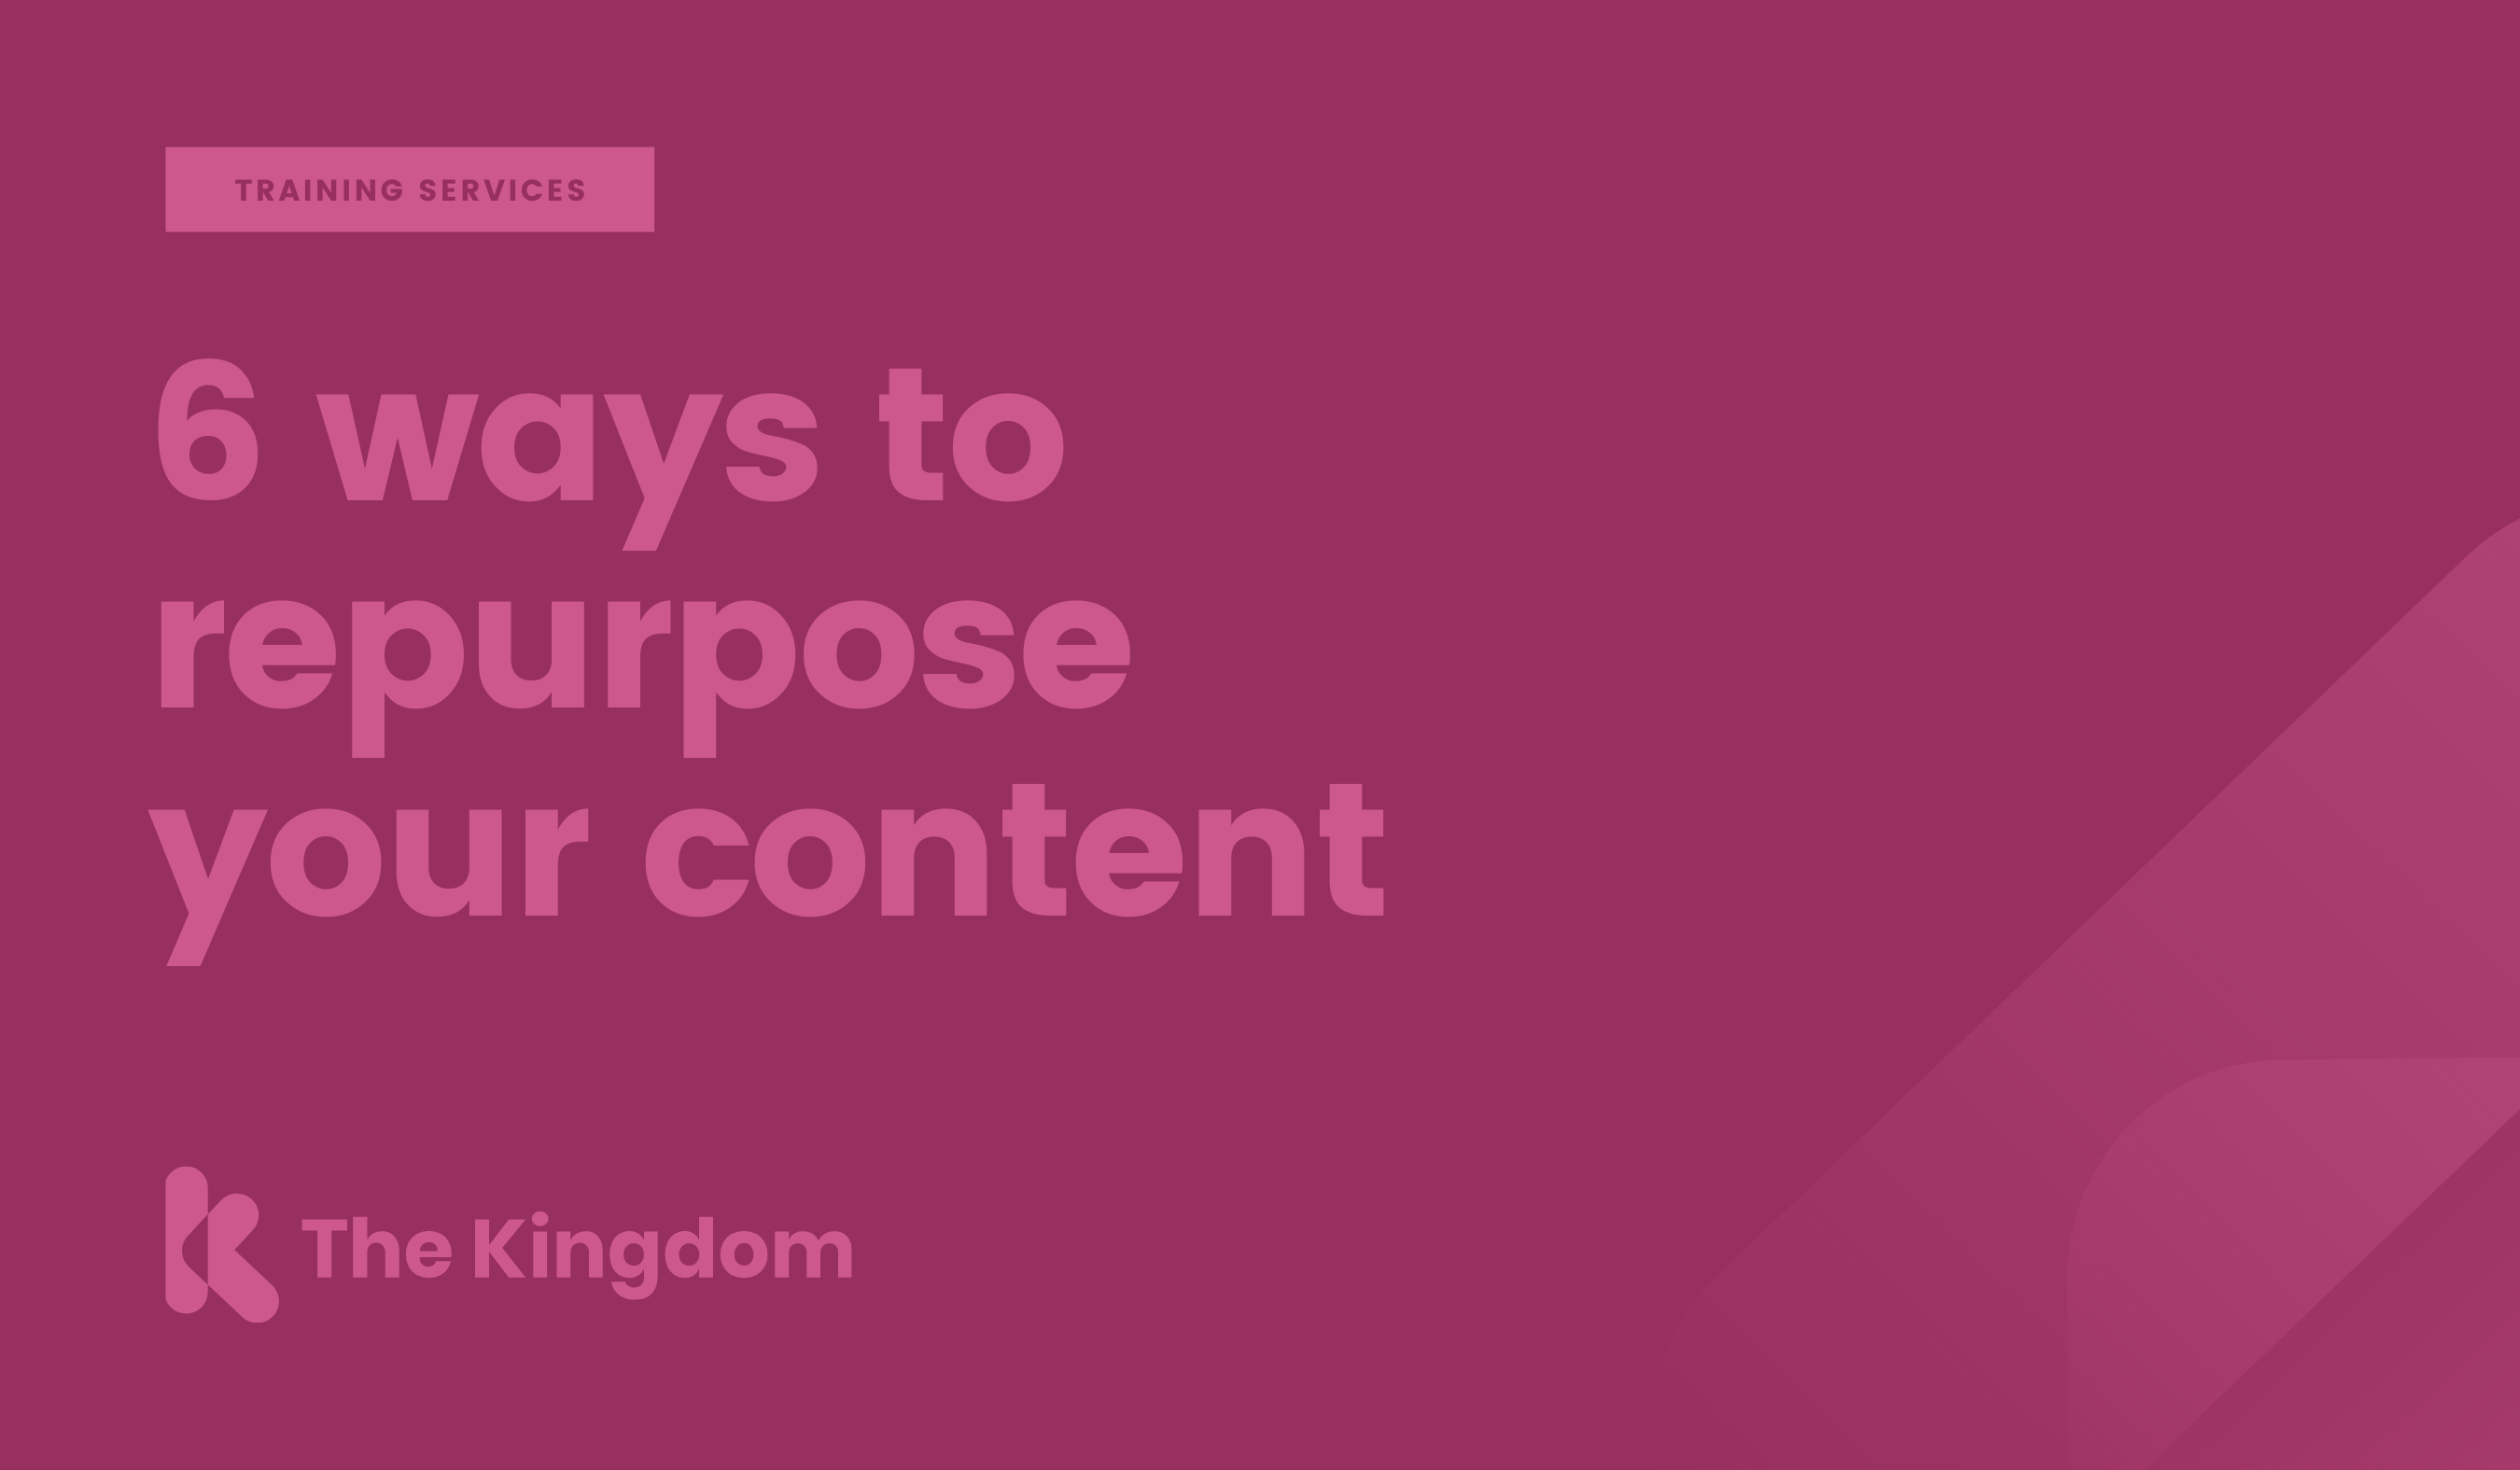 6 ways to repurpose your content